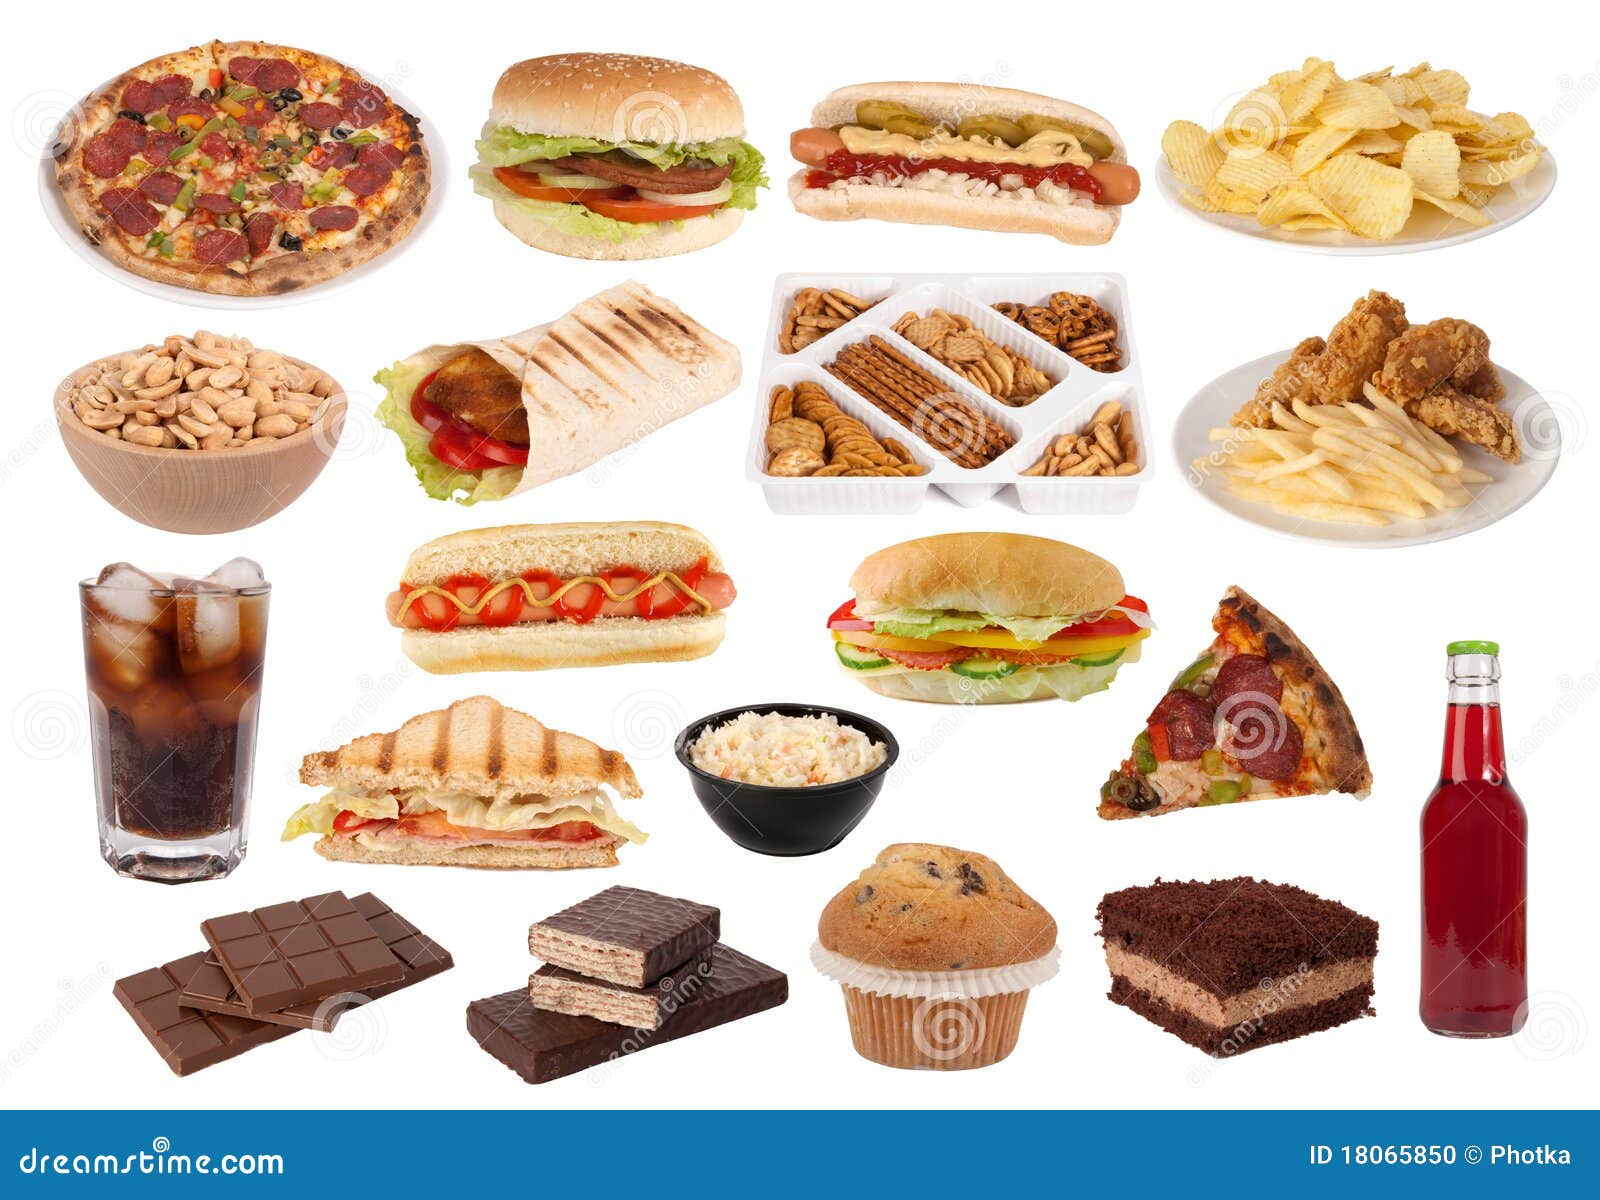  Fast Food And Snacks Collection Stock Photo Image of 